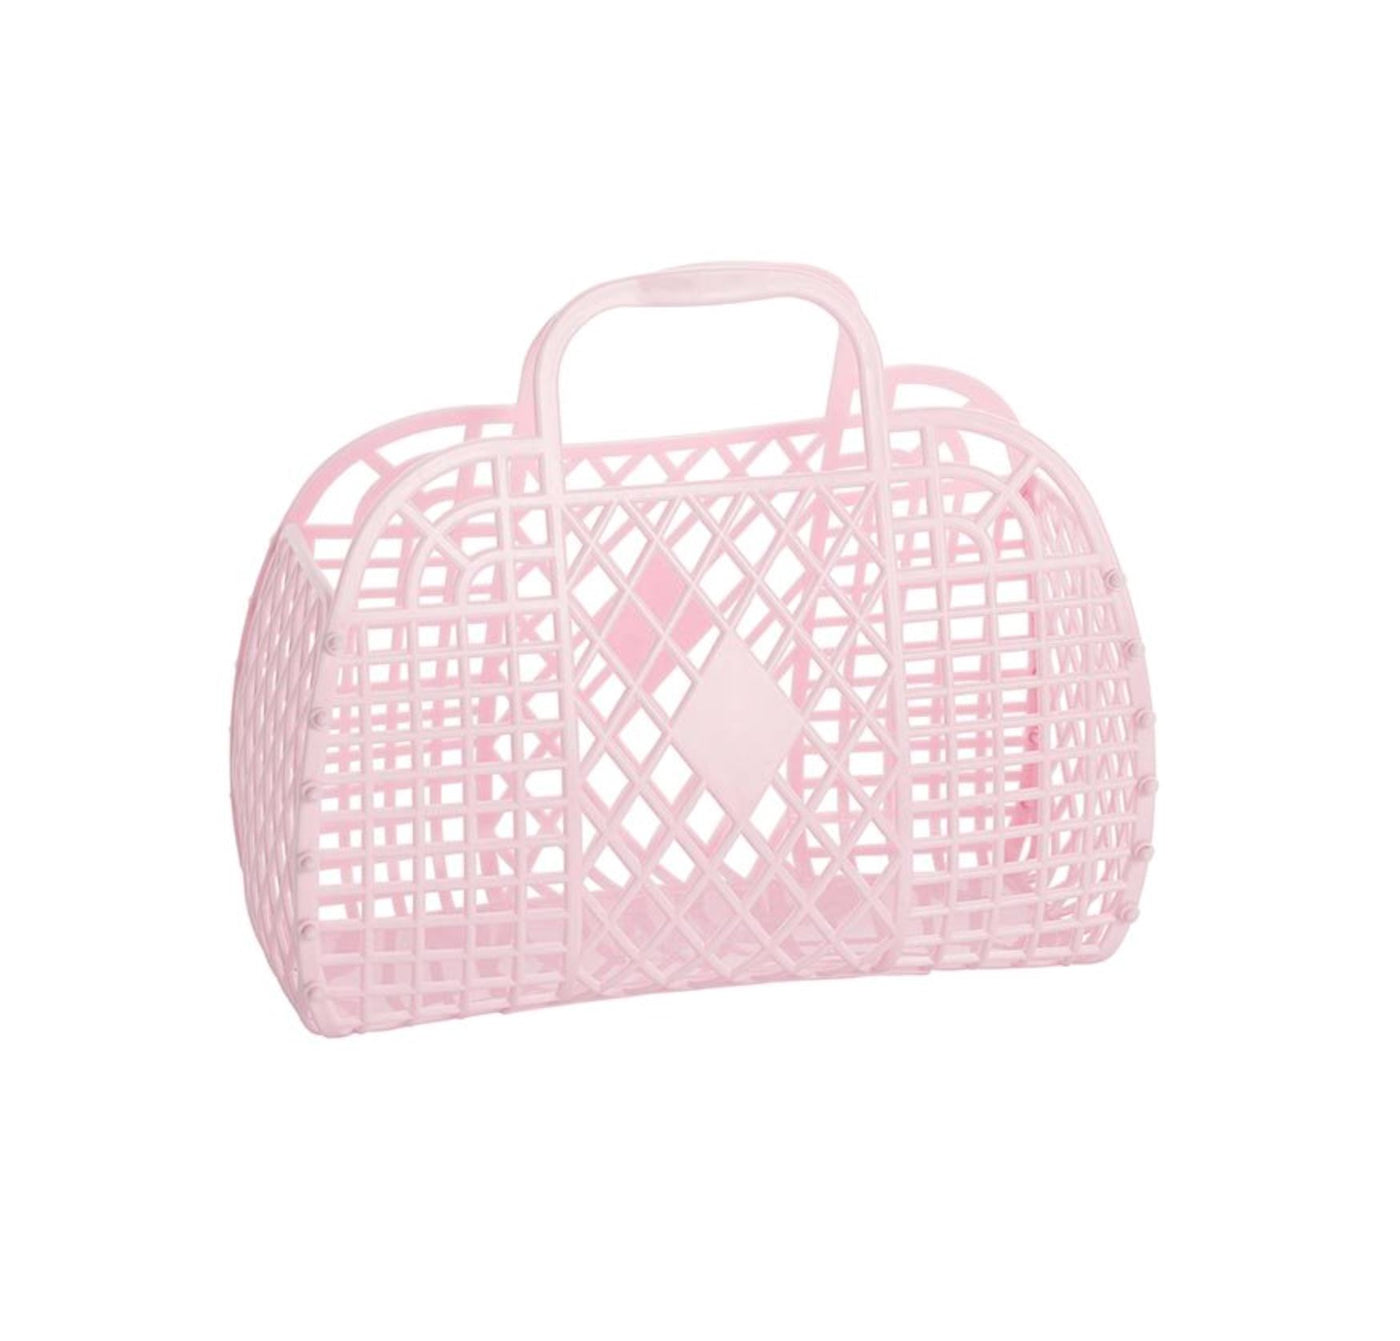 Sun Jellies Retro Basket Small - Pink Basket IS Gifts 